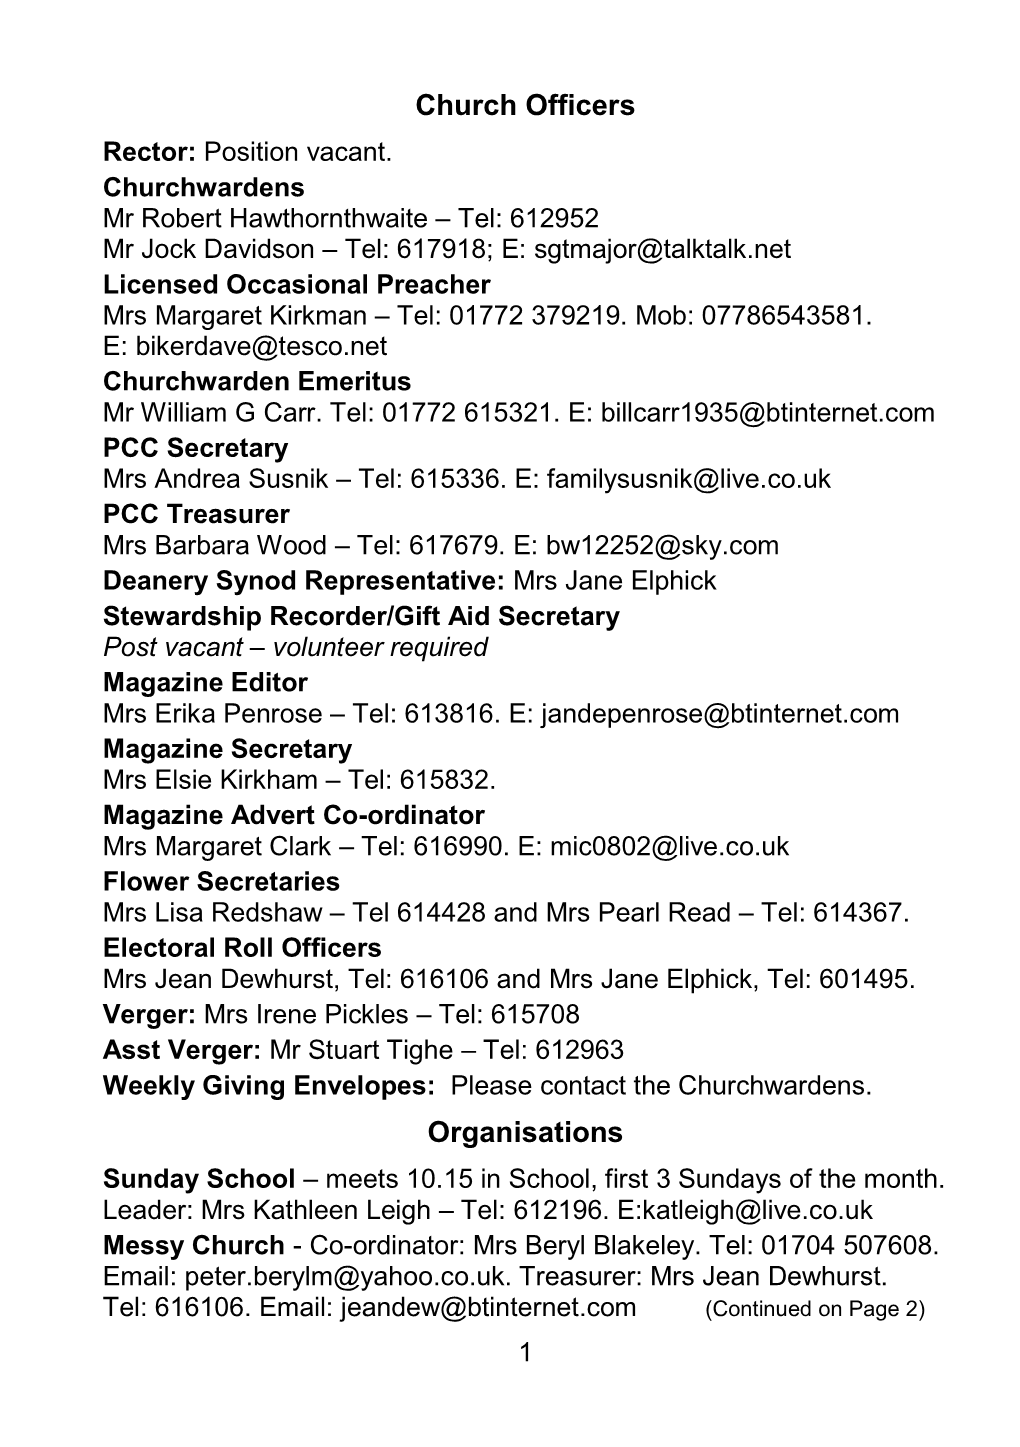 Church Officers Organisations